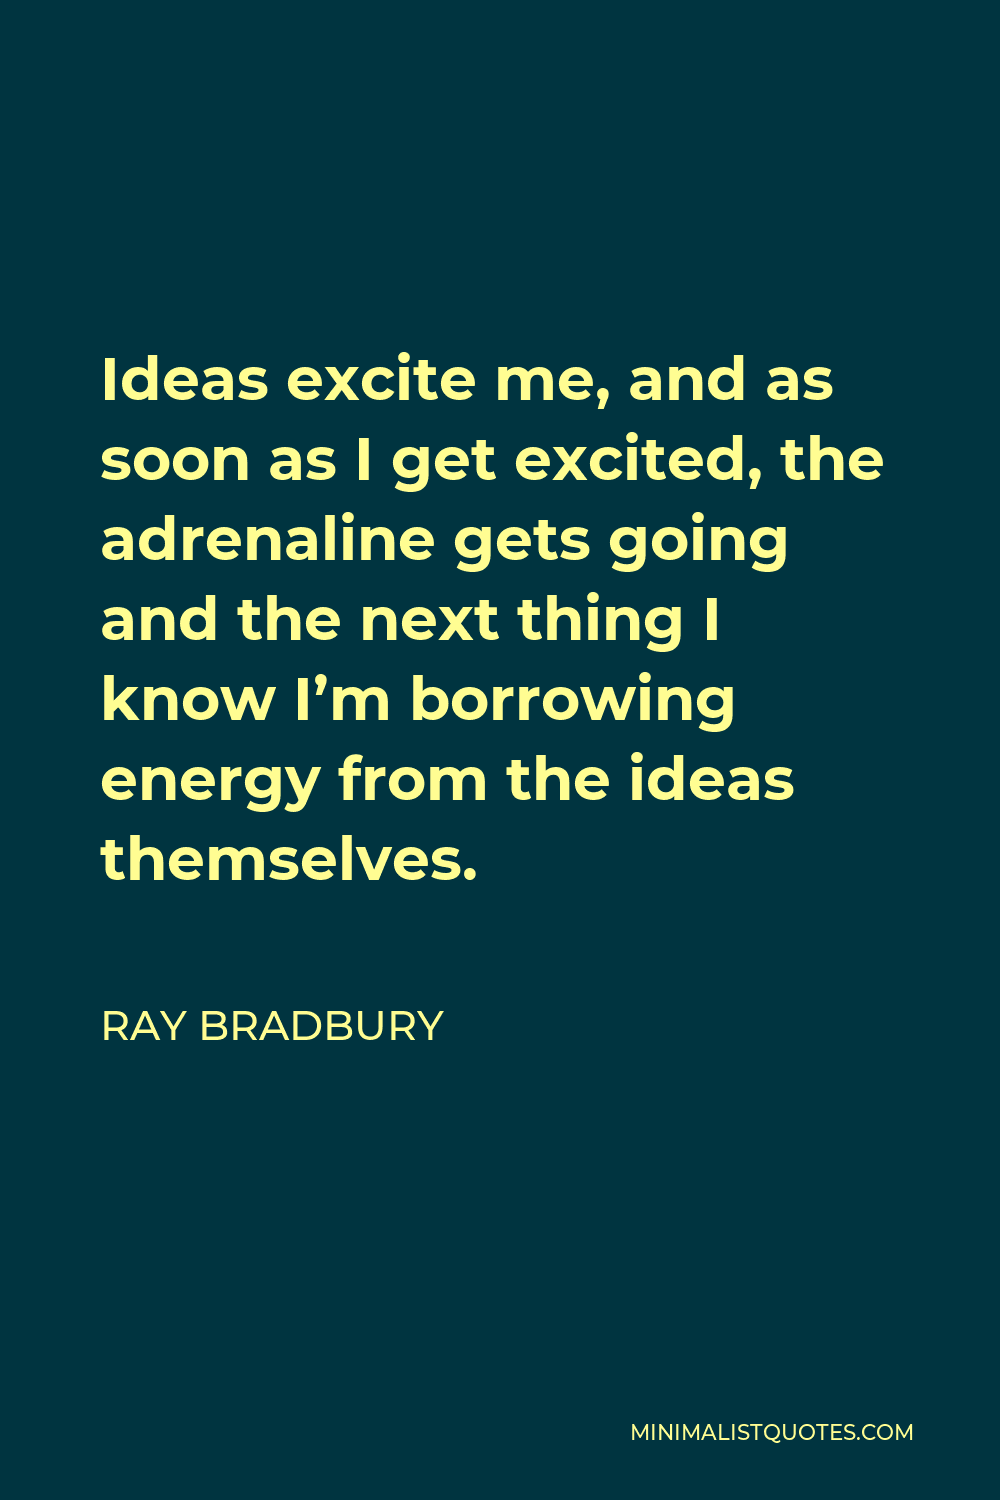 Ray Bradbury Quote - Ideas excite me, and as soon as I get excited, the adrenaline gets going and the next thing I know I’m borrowing energy from the ideas themselves.